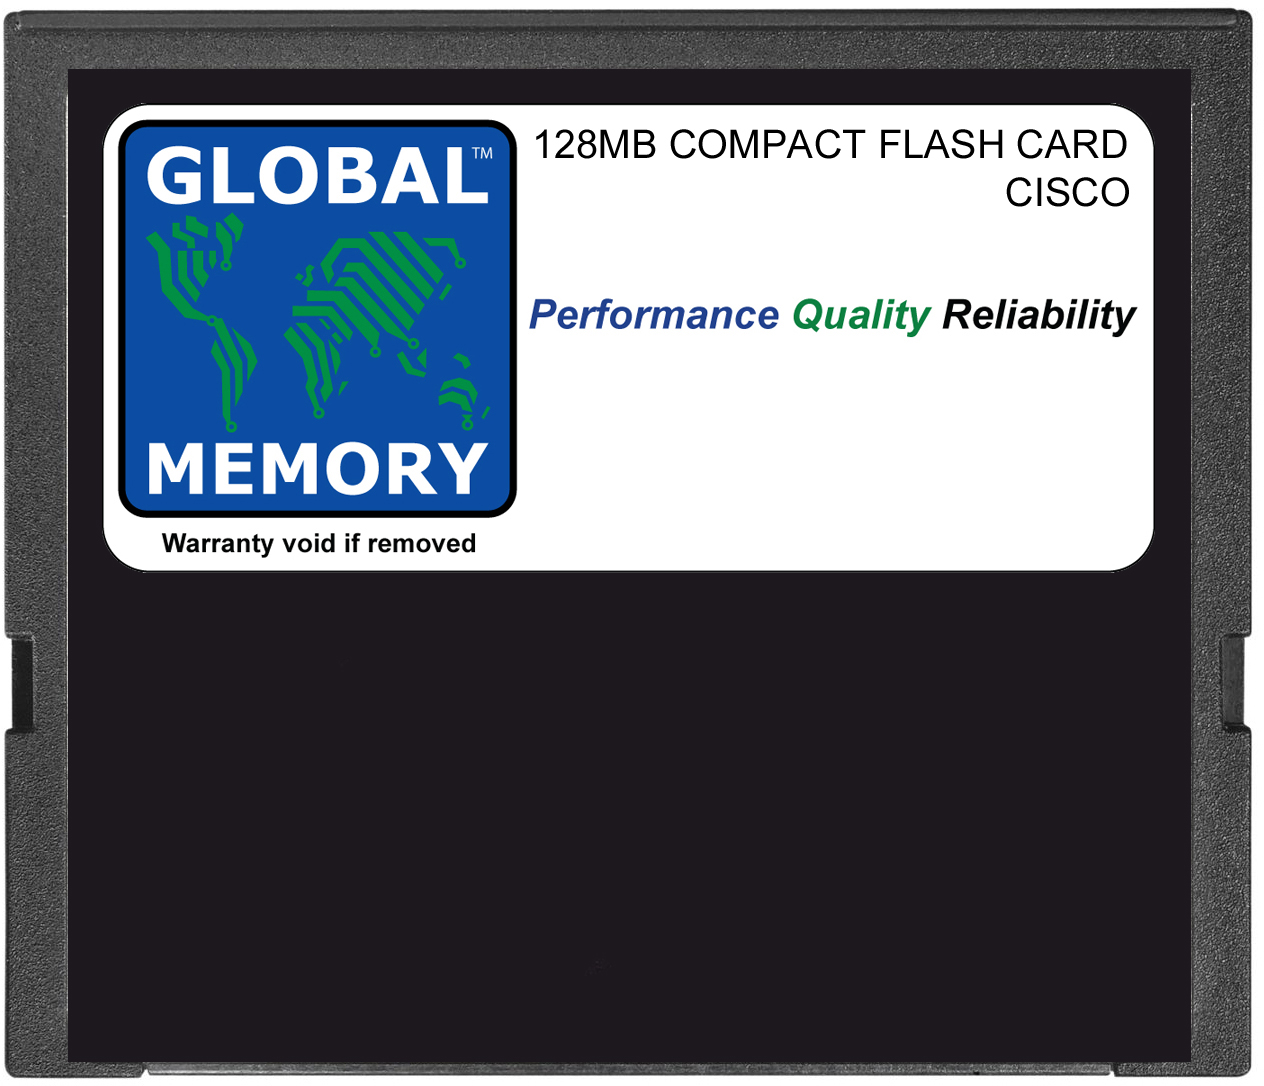 128MB COMPACT FLASH CARD MEMORY FOR CISCO CATALYST 4000 / 4500 SERIES SWITCHES SUPERVISOR ENGINE 2/3/4/5 (MEM-C4K-FLD128M)